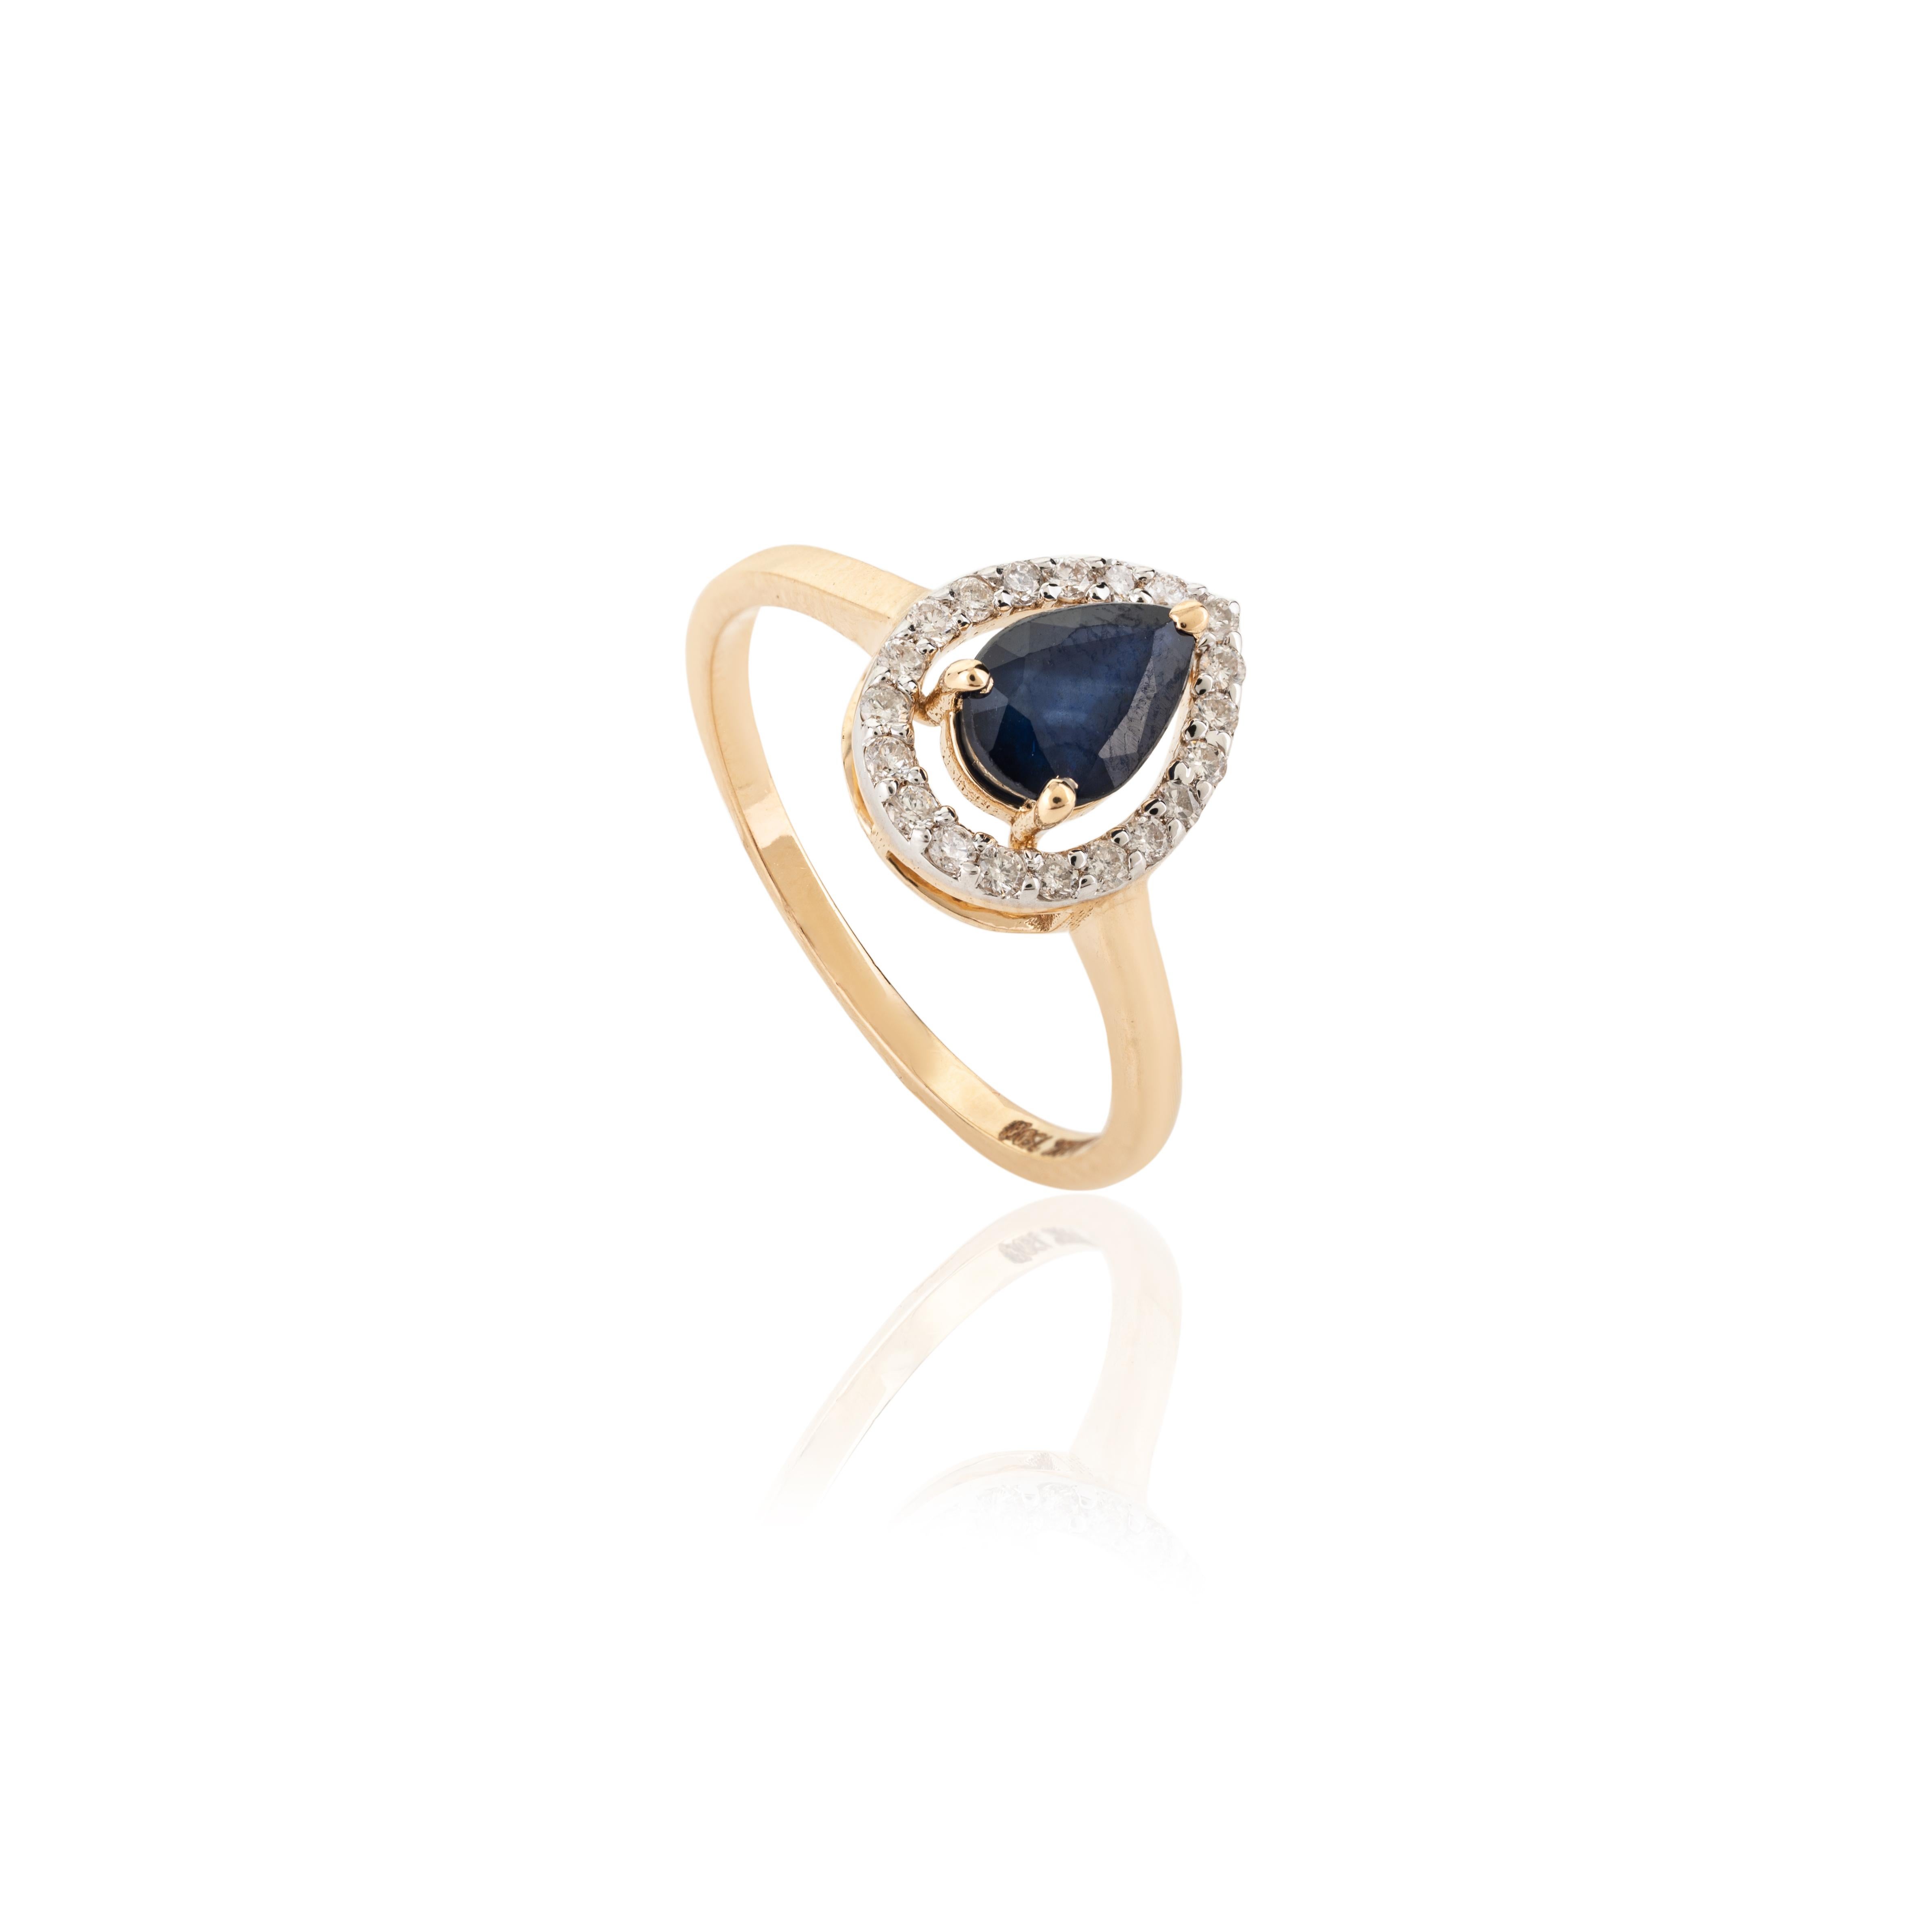 For Sale:  Pear Blue Sapphire Round Diamond Halo Engagement Ring Gift in 18k Yellow Gold 7